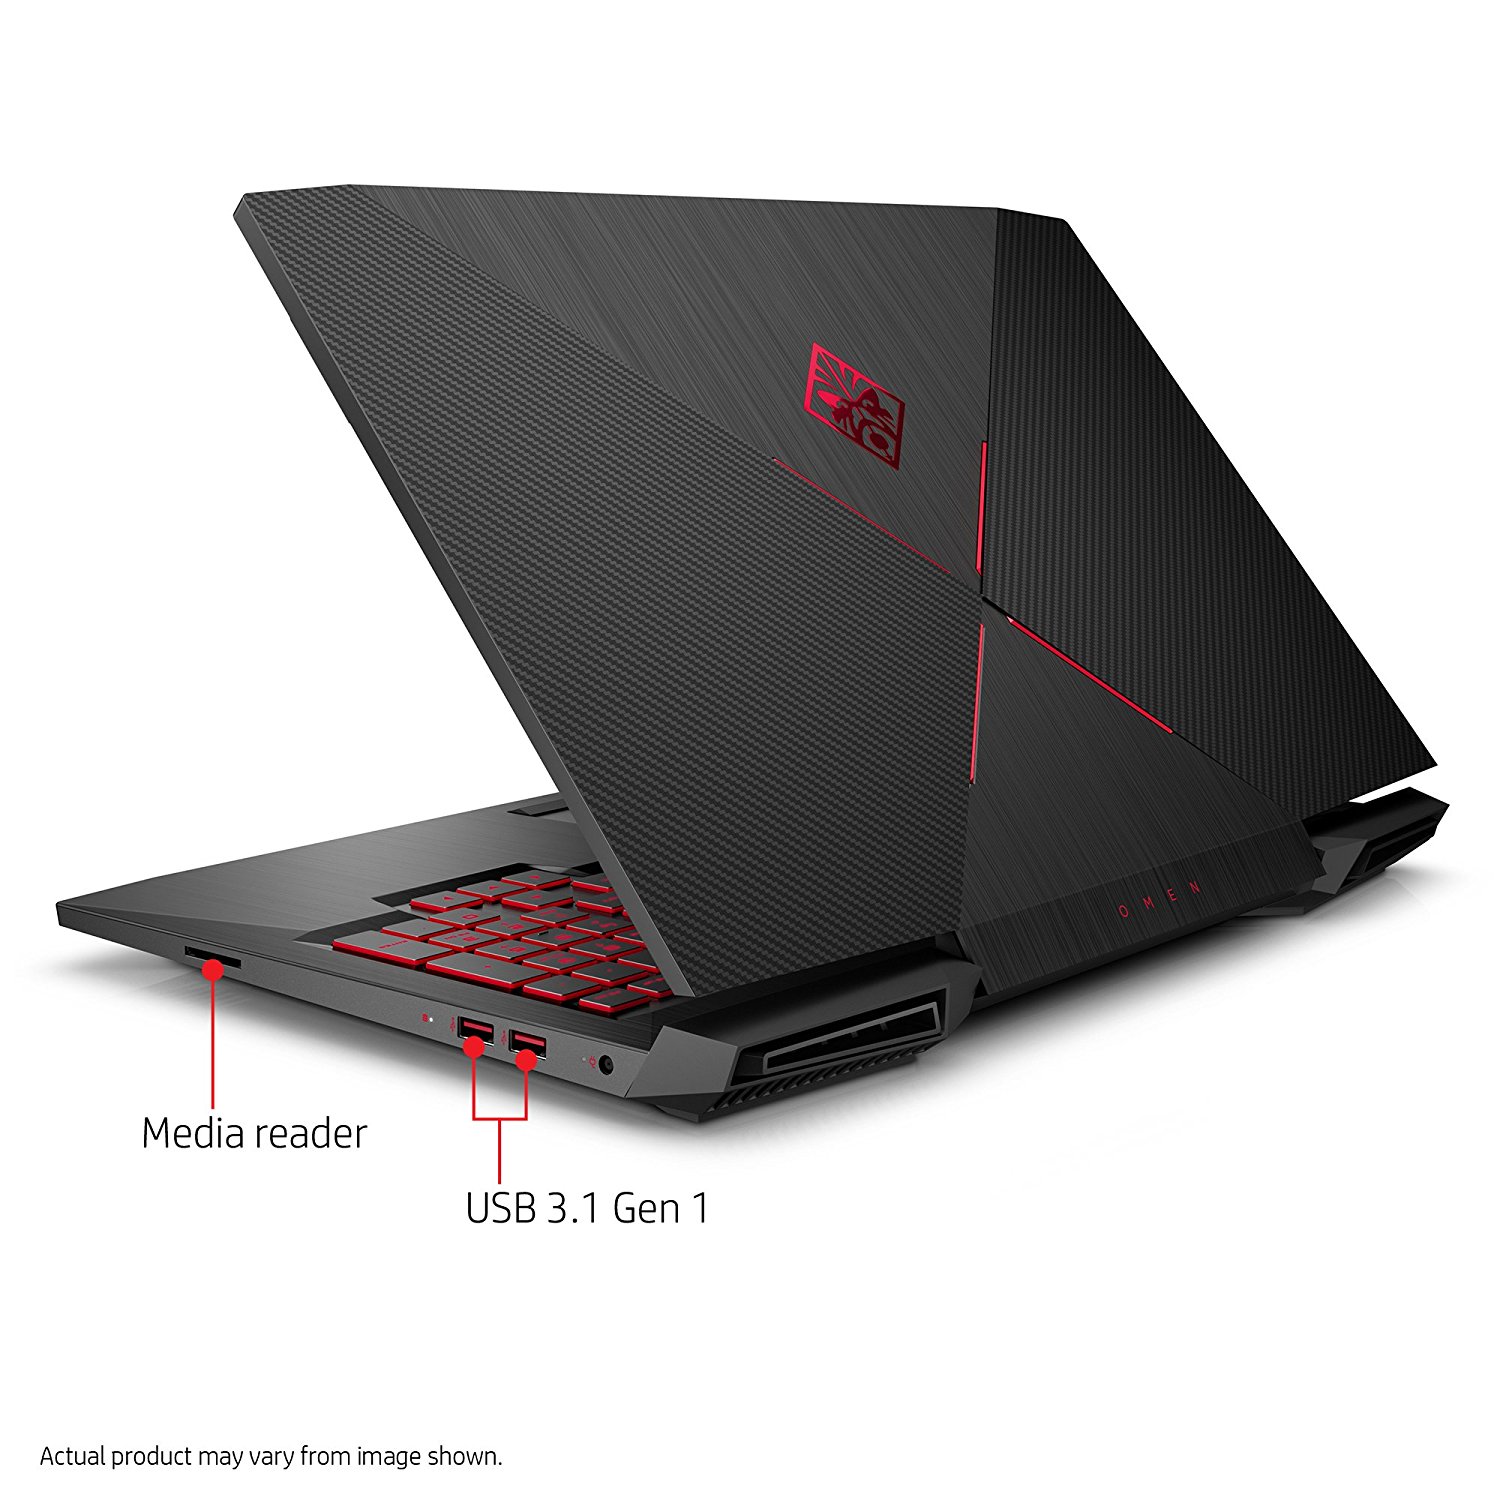 Today only: Save up to 36% on refurbished Omen gaming laptops